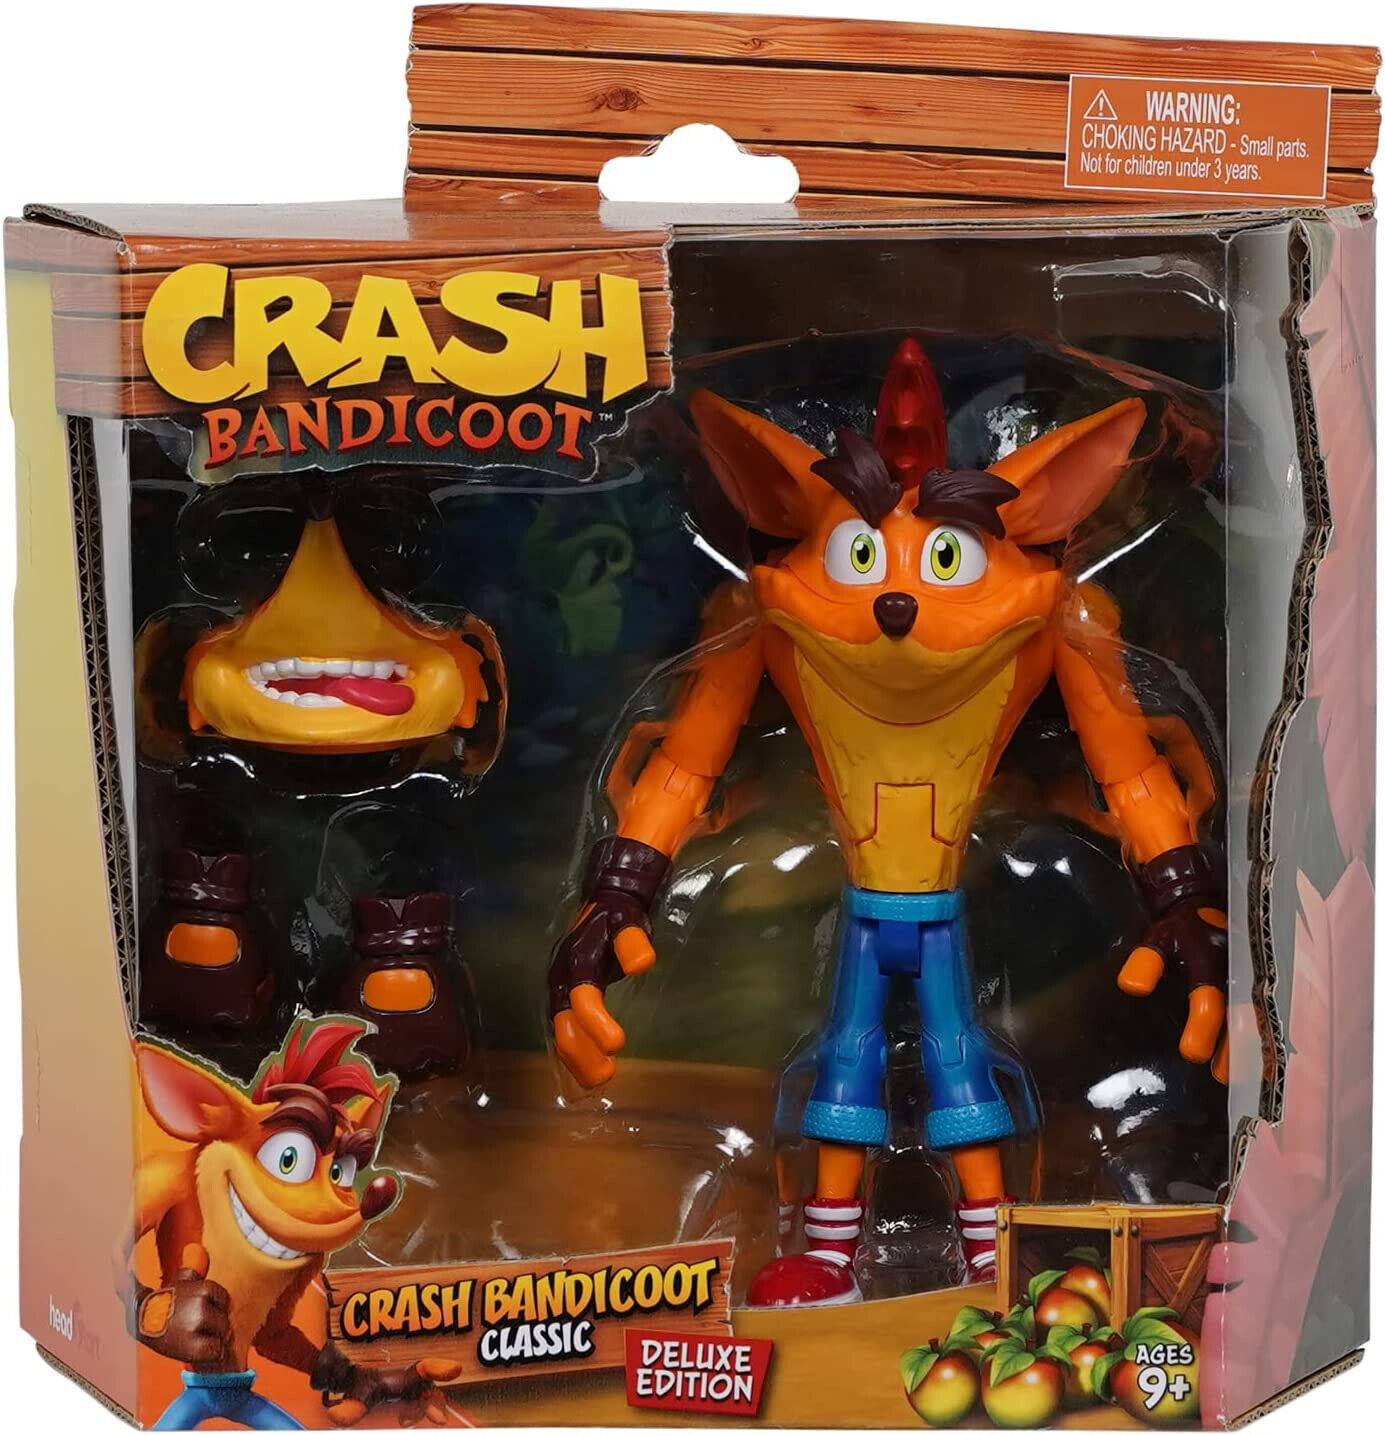 New Crash Bandicoot Deluxe Figure - Articulated & Ready to Play!